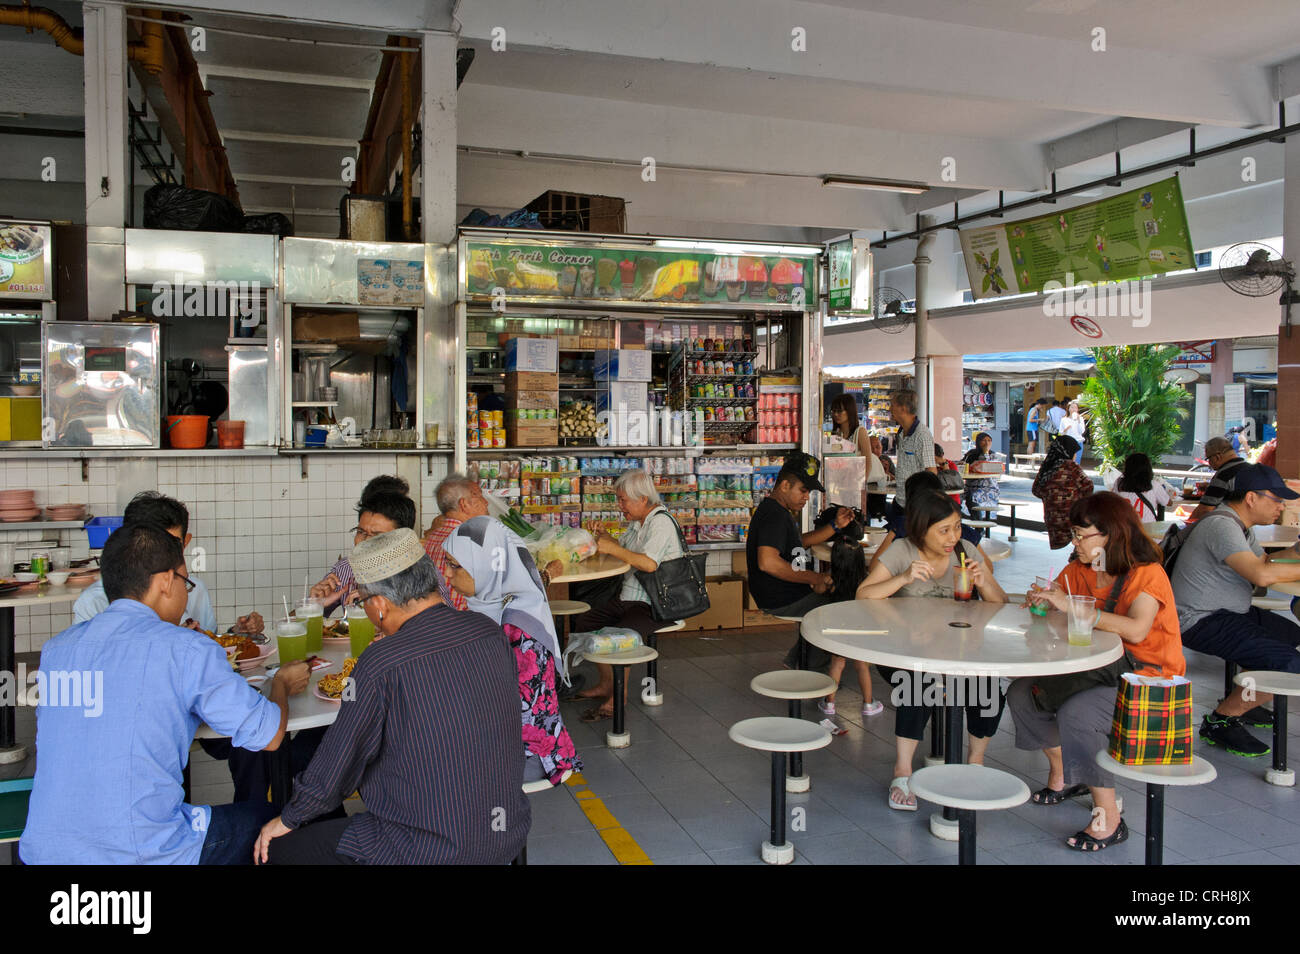 A traditional restaurant with seating areas with dinners, Food Court, Singapore. Stock Photo